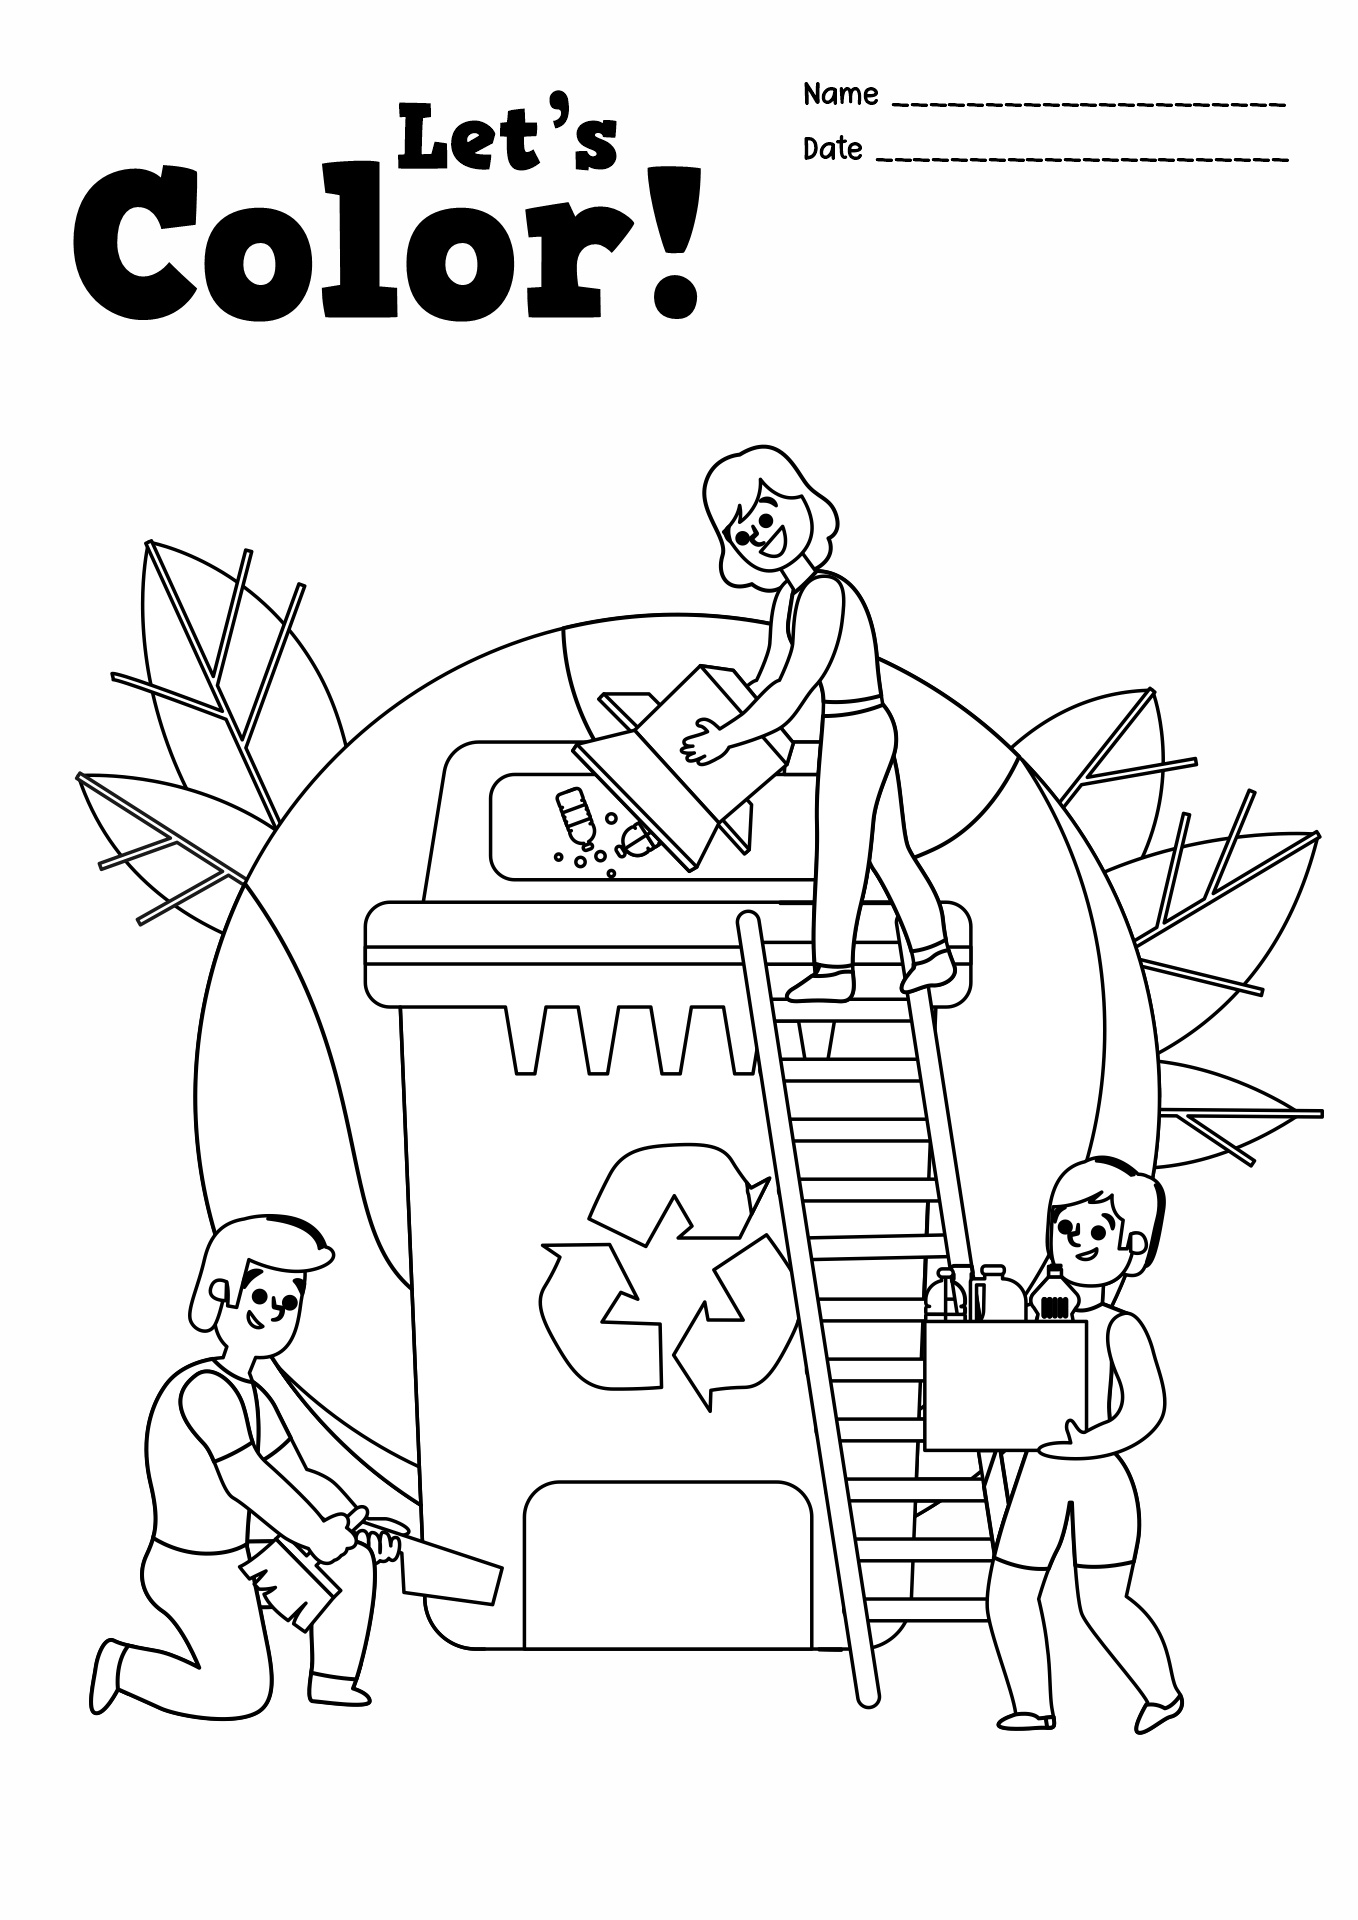 12 Best Images of Recycling Coloring Worksheets - Recycling Fun